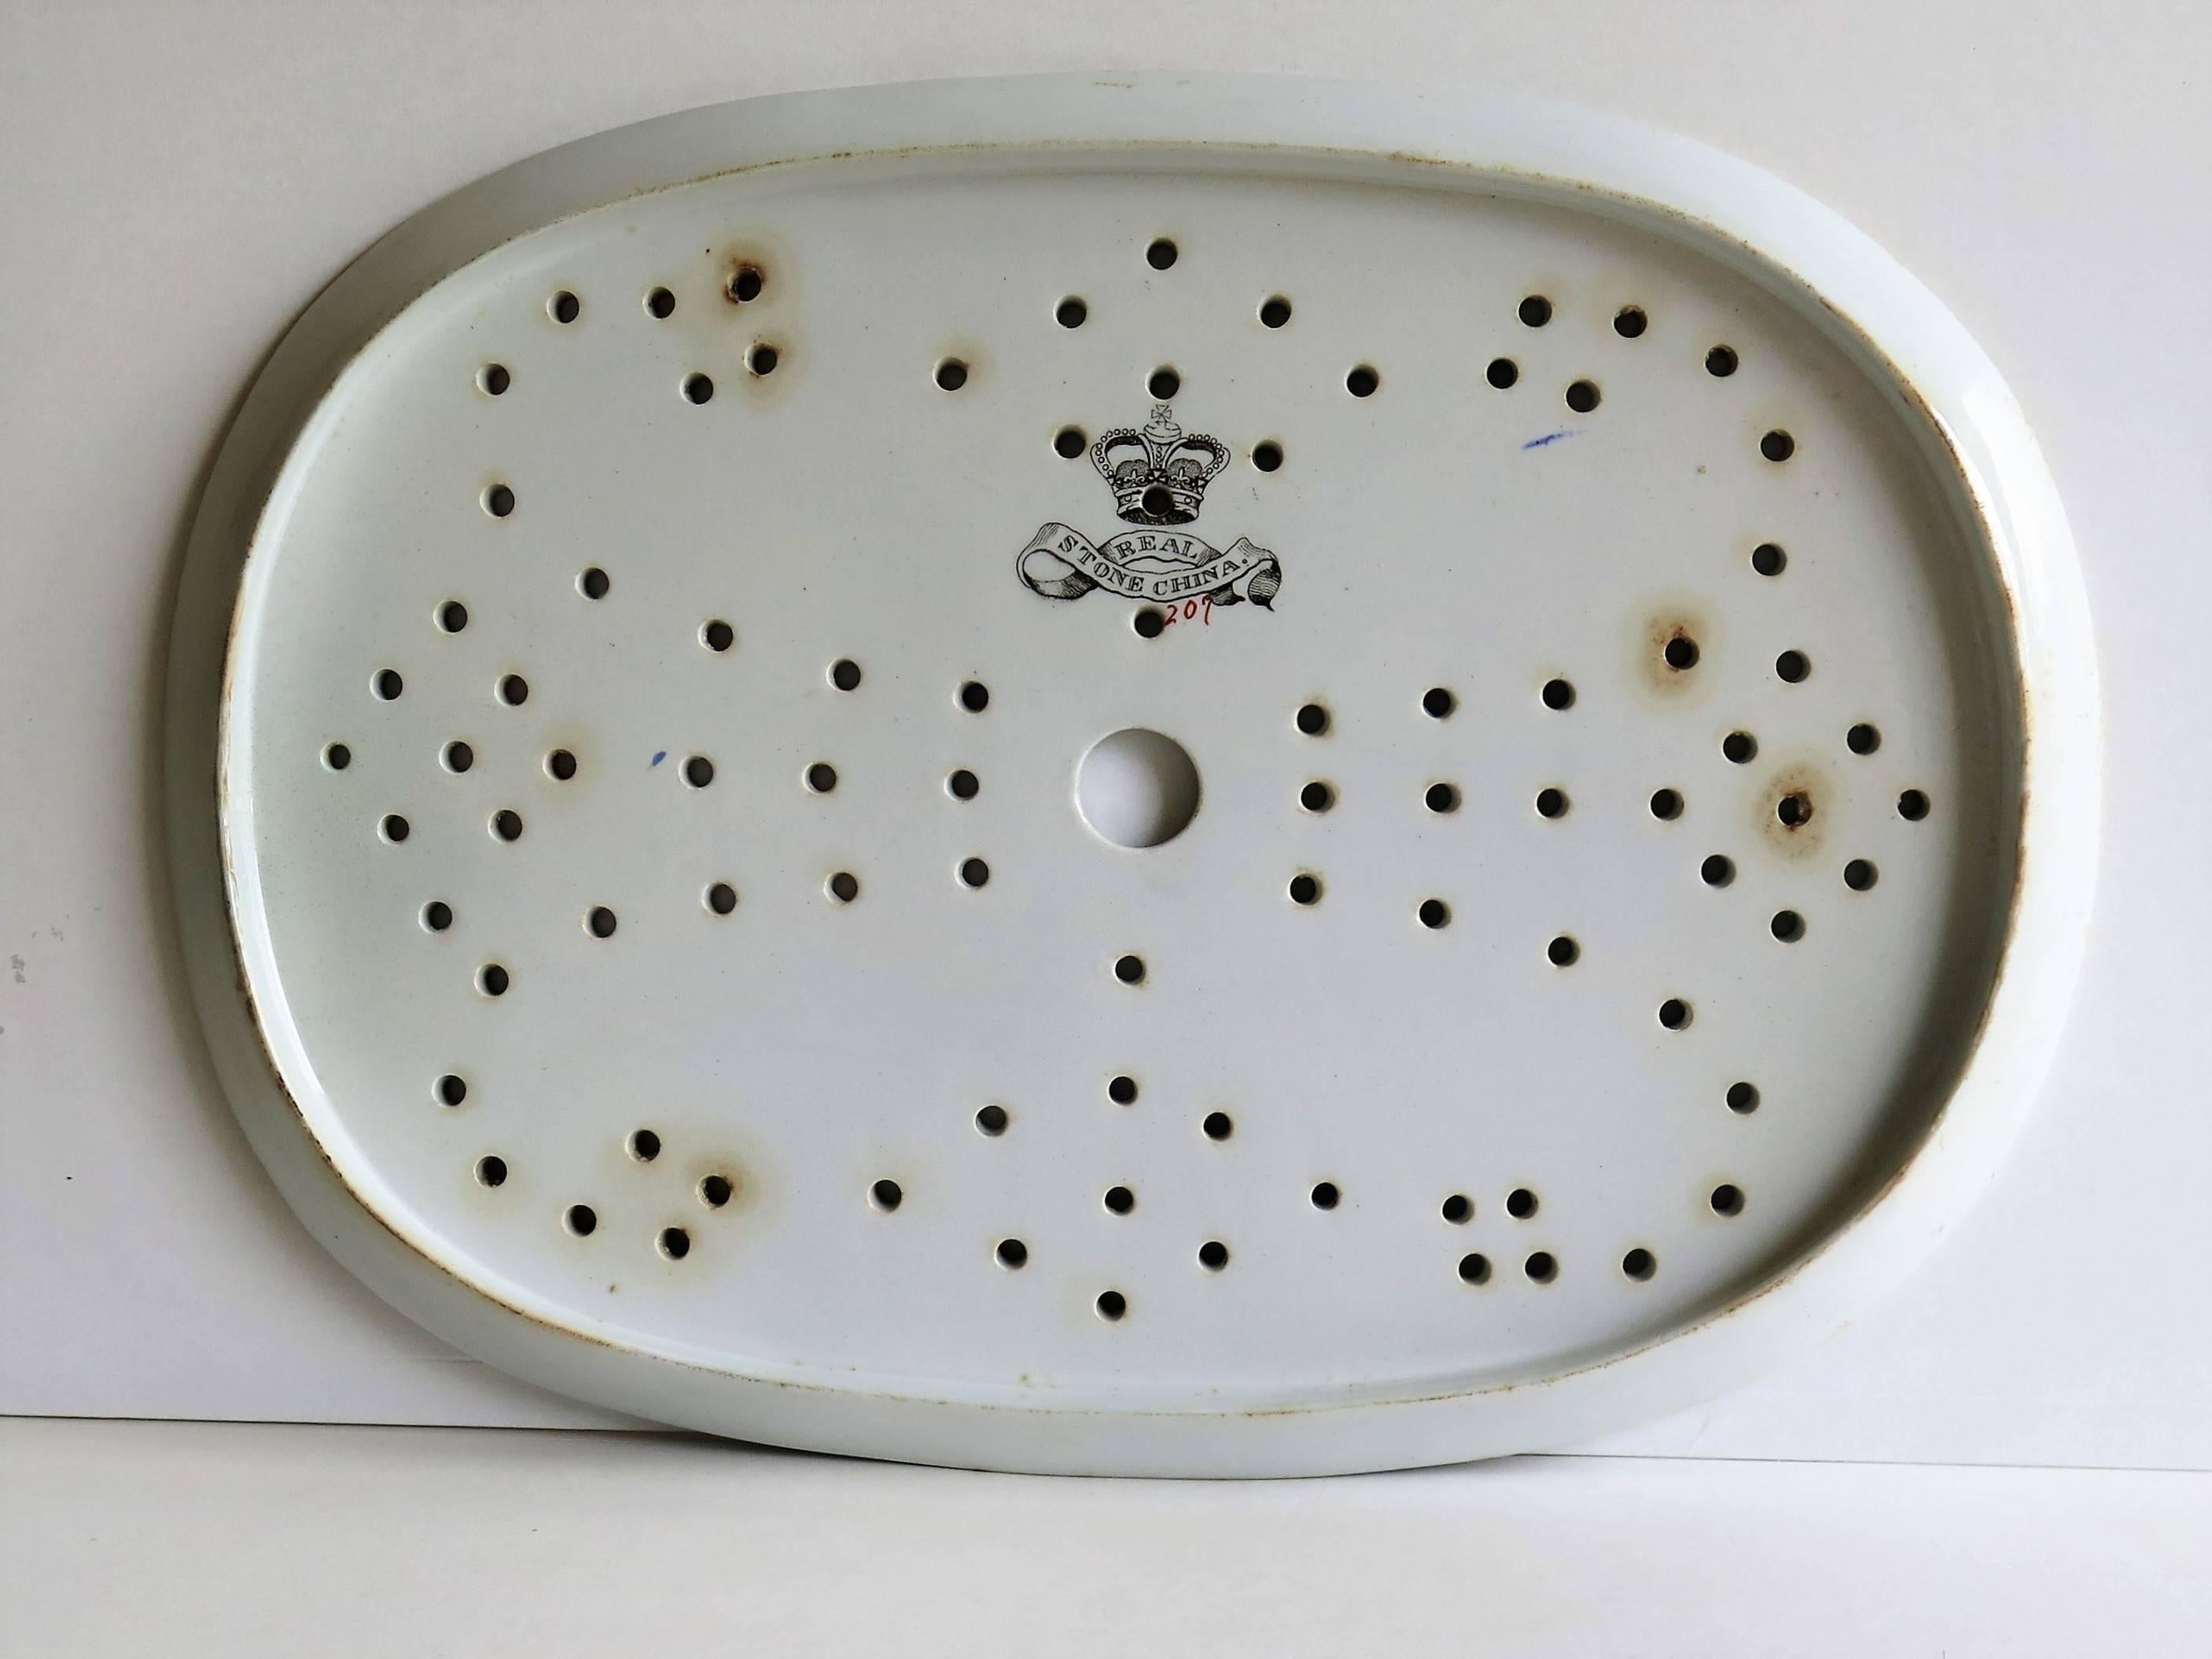 Georgian Ironstone Platter or Drainer Plate by Hicks Meigh & Johnson, Circa 1830 For Sale 1